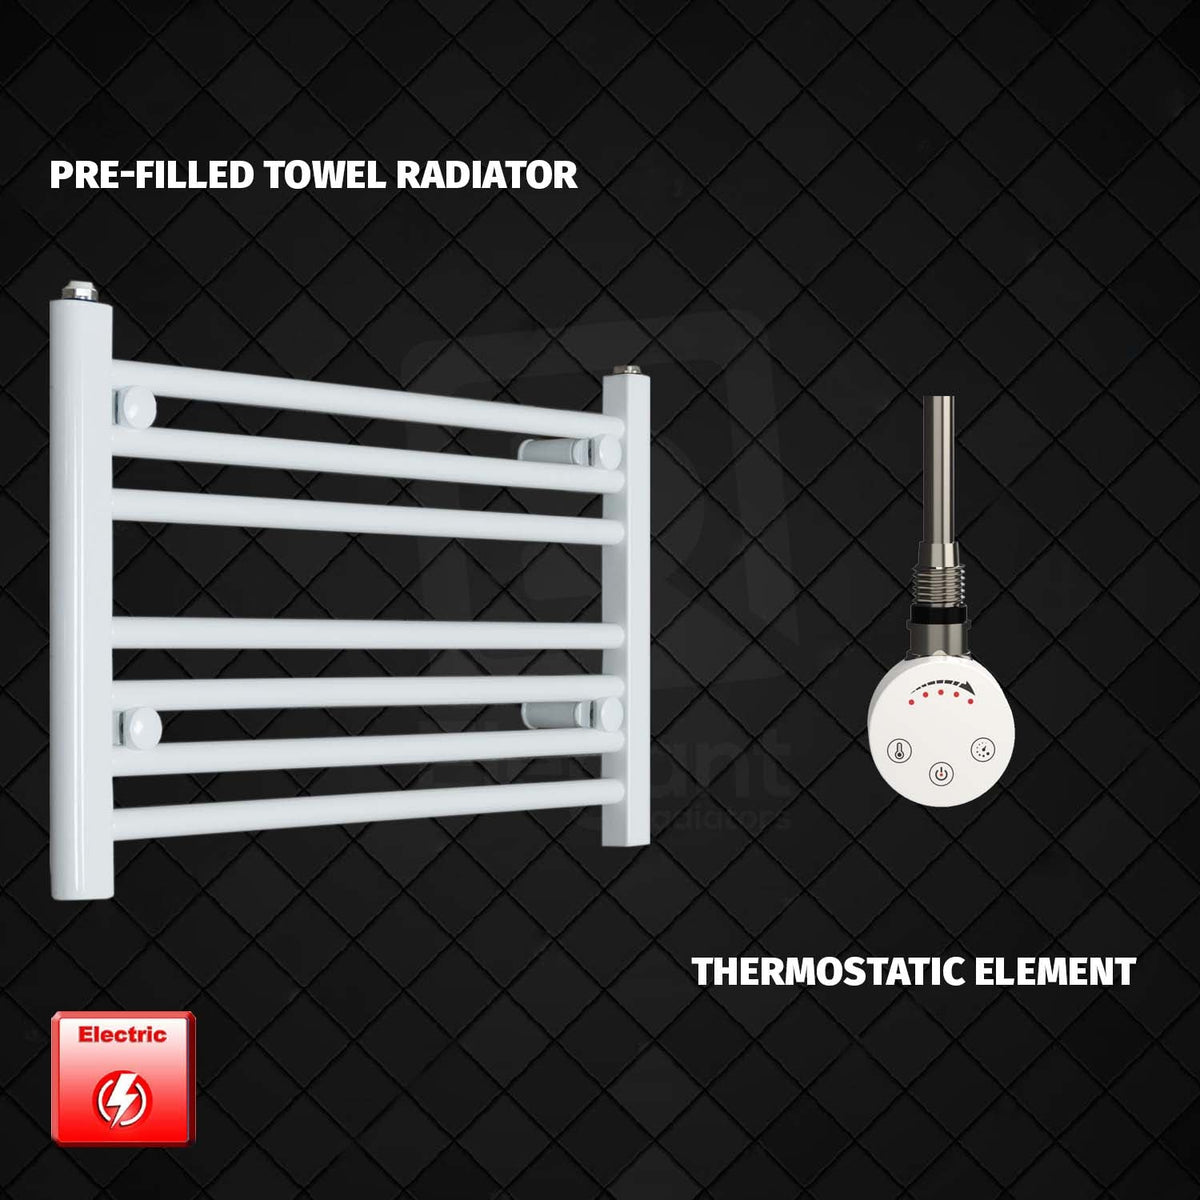 400 x 600 Pre-Filled Electric Heated Towel Radiator White HTR SMR Thermostatic Element No Timer